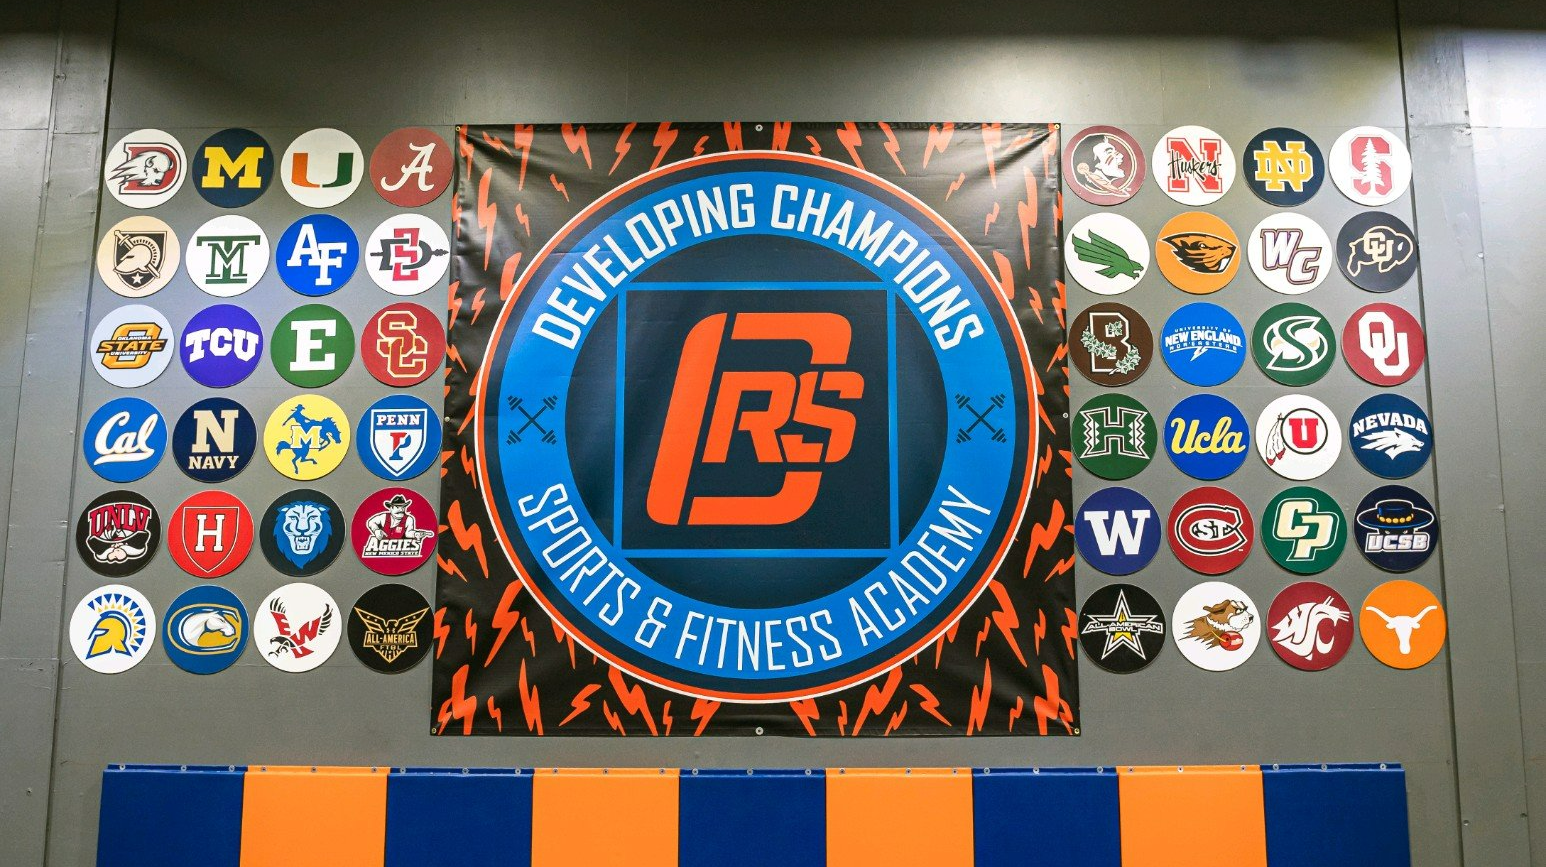 CRS Sports and Fitness Academy 714-795-0950 in Orange county CA